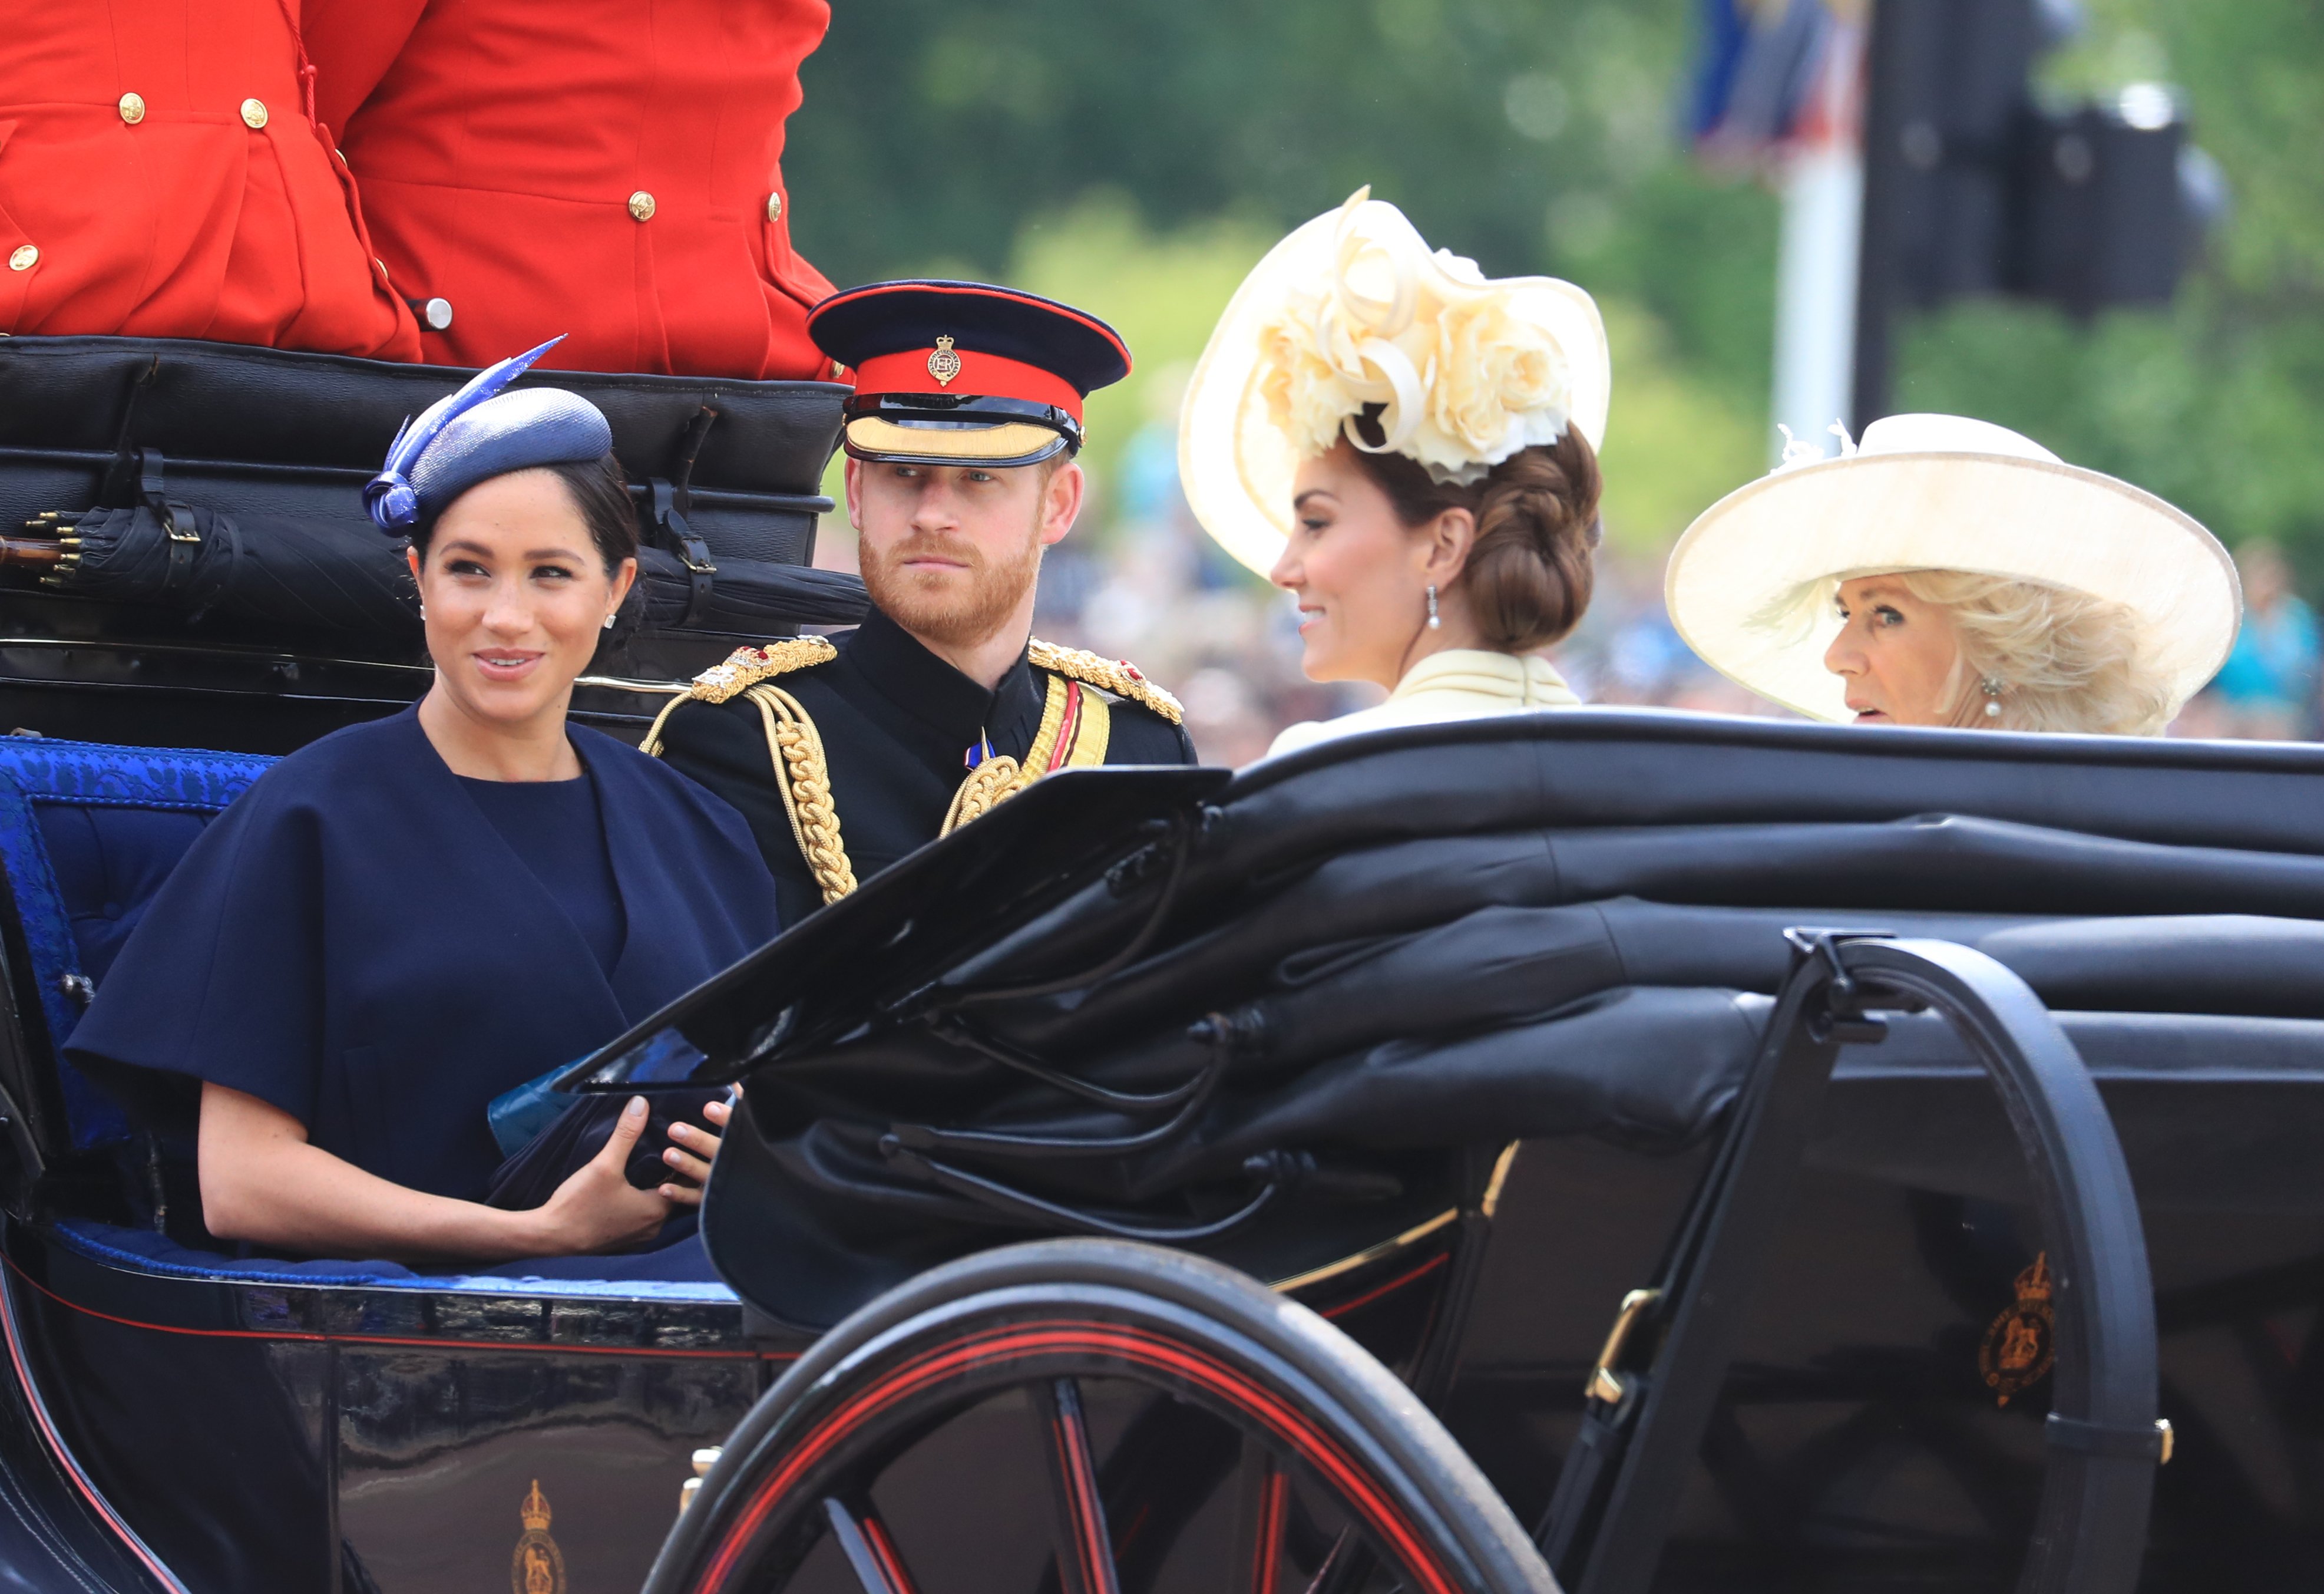 The Duke and Duchess of Sussex, with the Duchess of Cambridge and the Duchess of Cornwall, make their way along The Mall to Horse Guards Parade in London, ahead of the Trooping the Colour ceremony, as The Queen celebrates her official birthday. | Source: Getty Images